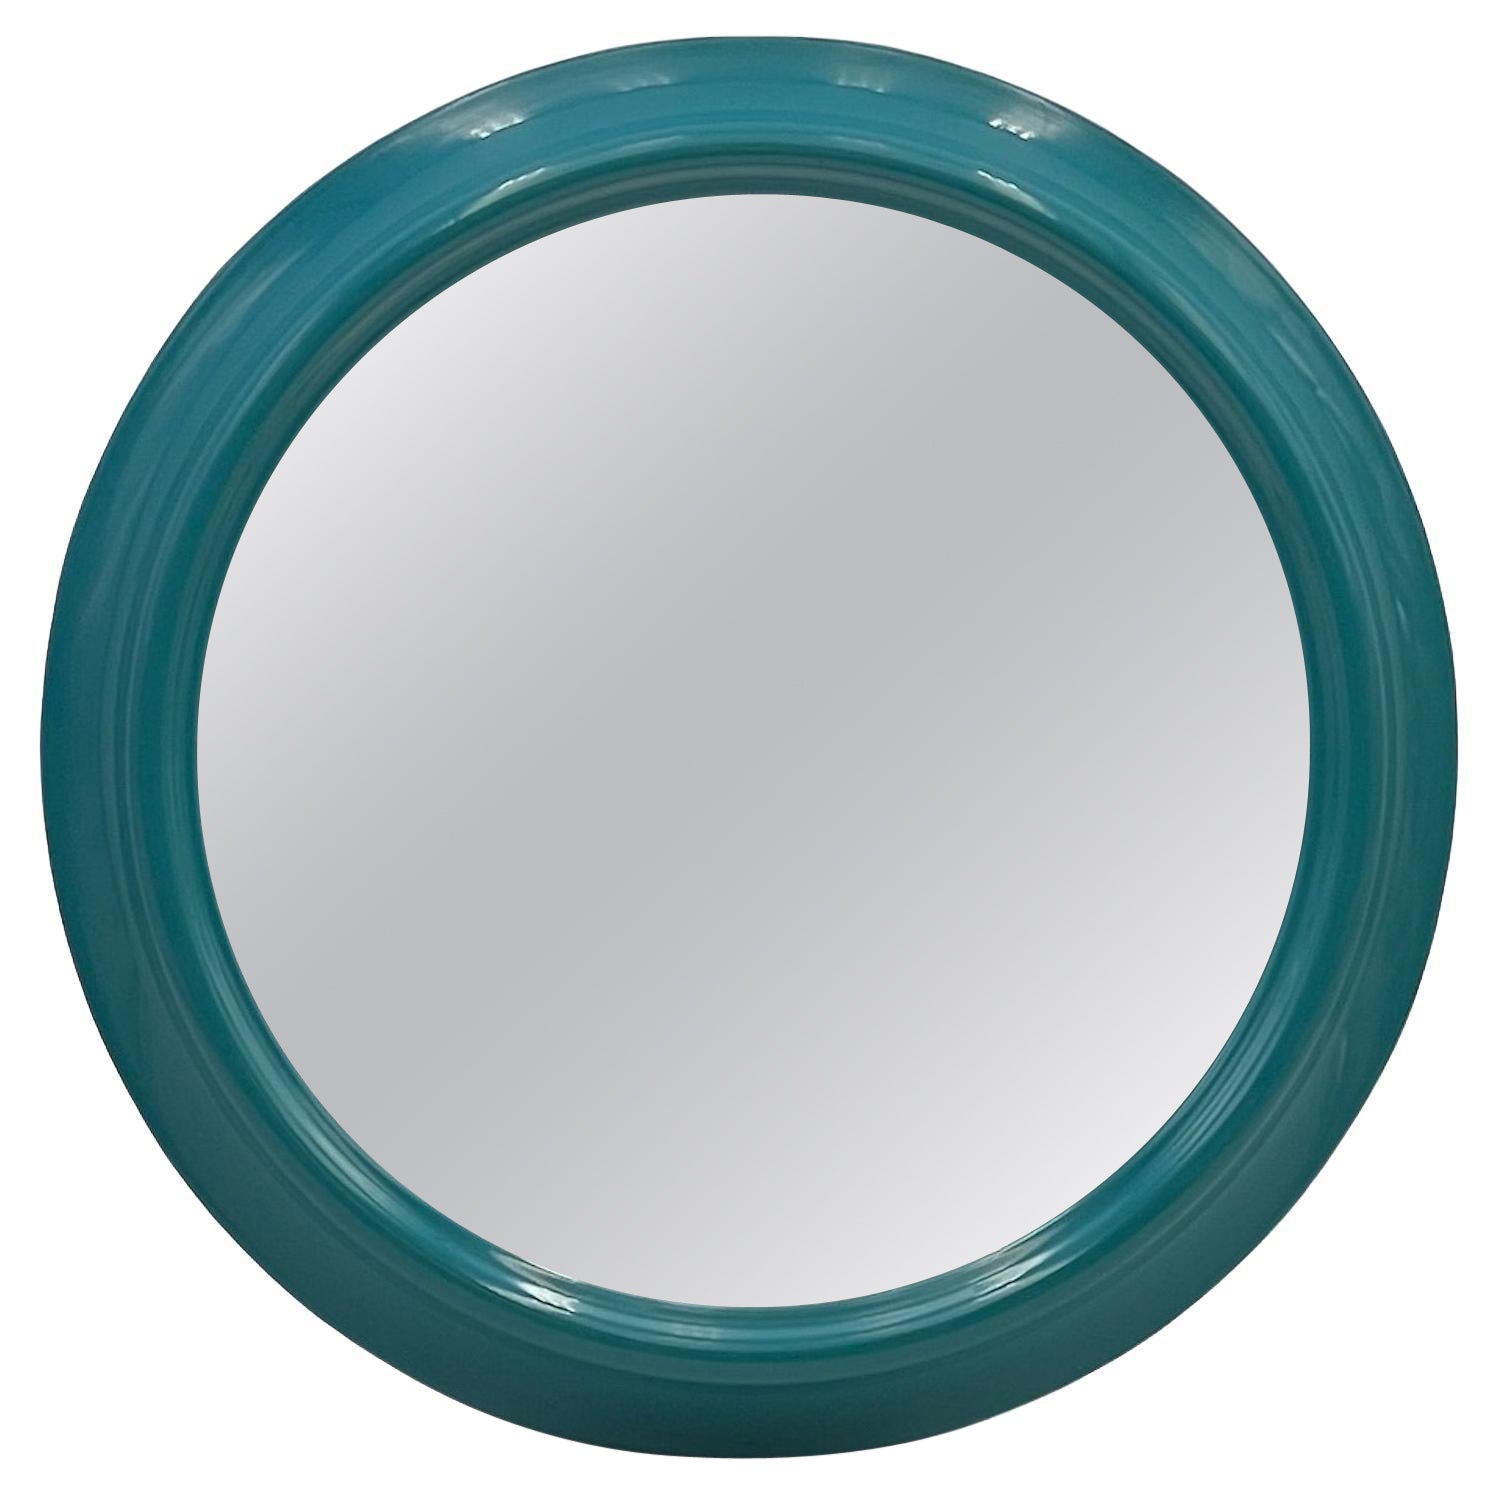 Vintage Round Wall Mirror in Turquoise Blue Made in Italy, 1970s